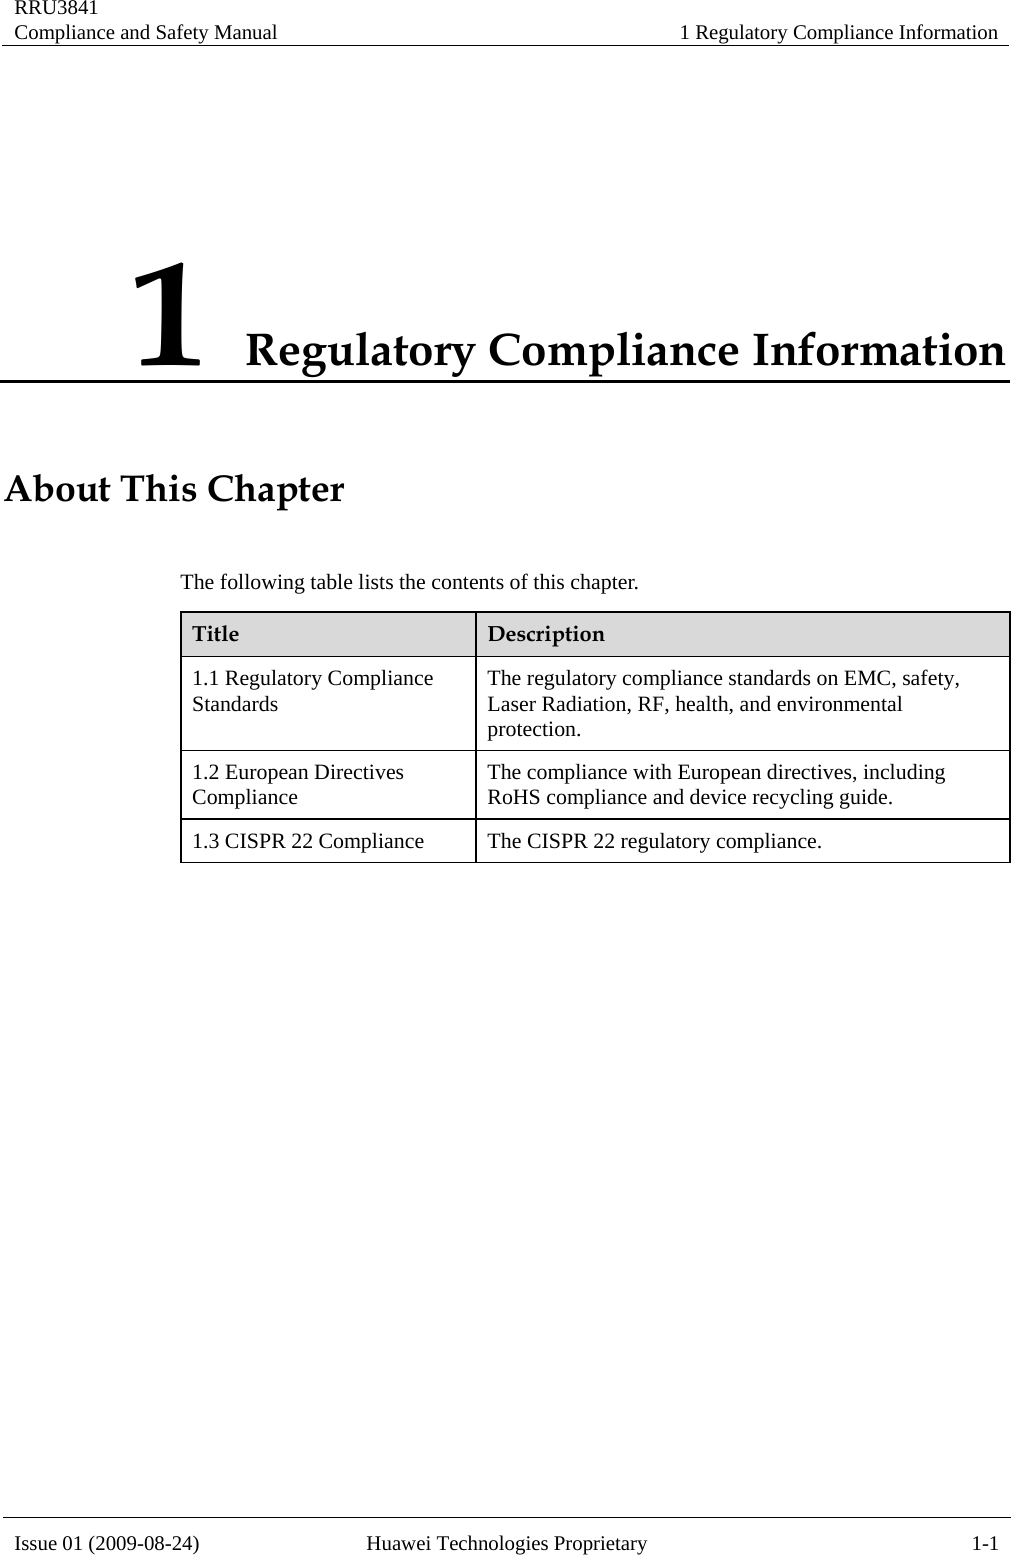 RRU3841 Compliance and Safety Manual  1 Regulatory Compliance Information  Issue 01 (2009-08-24)  Huawei Technologies Proprietary  1-1 1 Regulatory Compliance Information About This Chapter The following table lists the contents of this chapter. Title  Description 1.1 Regulatory Compliance Standards  The regulatory compliance standards on EMC, safety, Laser Radiation, RF, health, and environmental protection. 1.2 European Directives Compliance  The compliance with European directives, including RoHS compliance and device recycling guide. 1.3 CISPR 22 Compliance  The CISPR 22 regulatory compliance.  